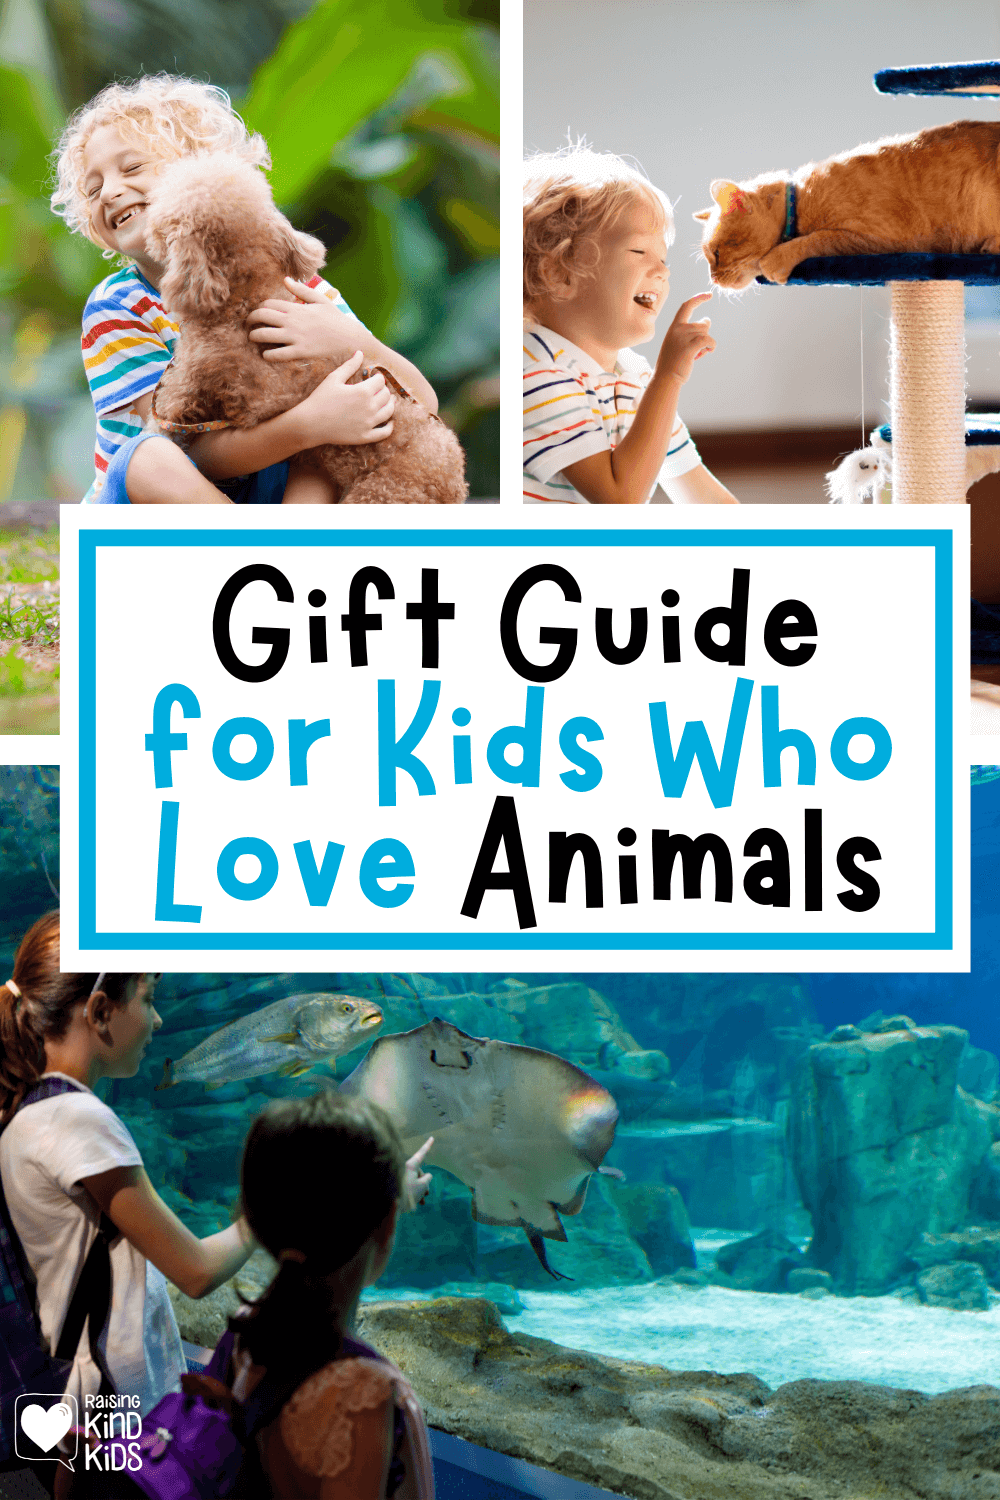 Use this kids gift guide for gifts for animals lovers so they get a gift they love.